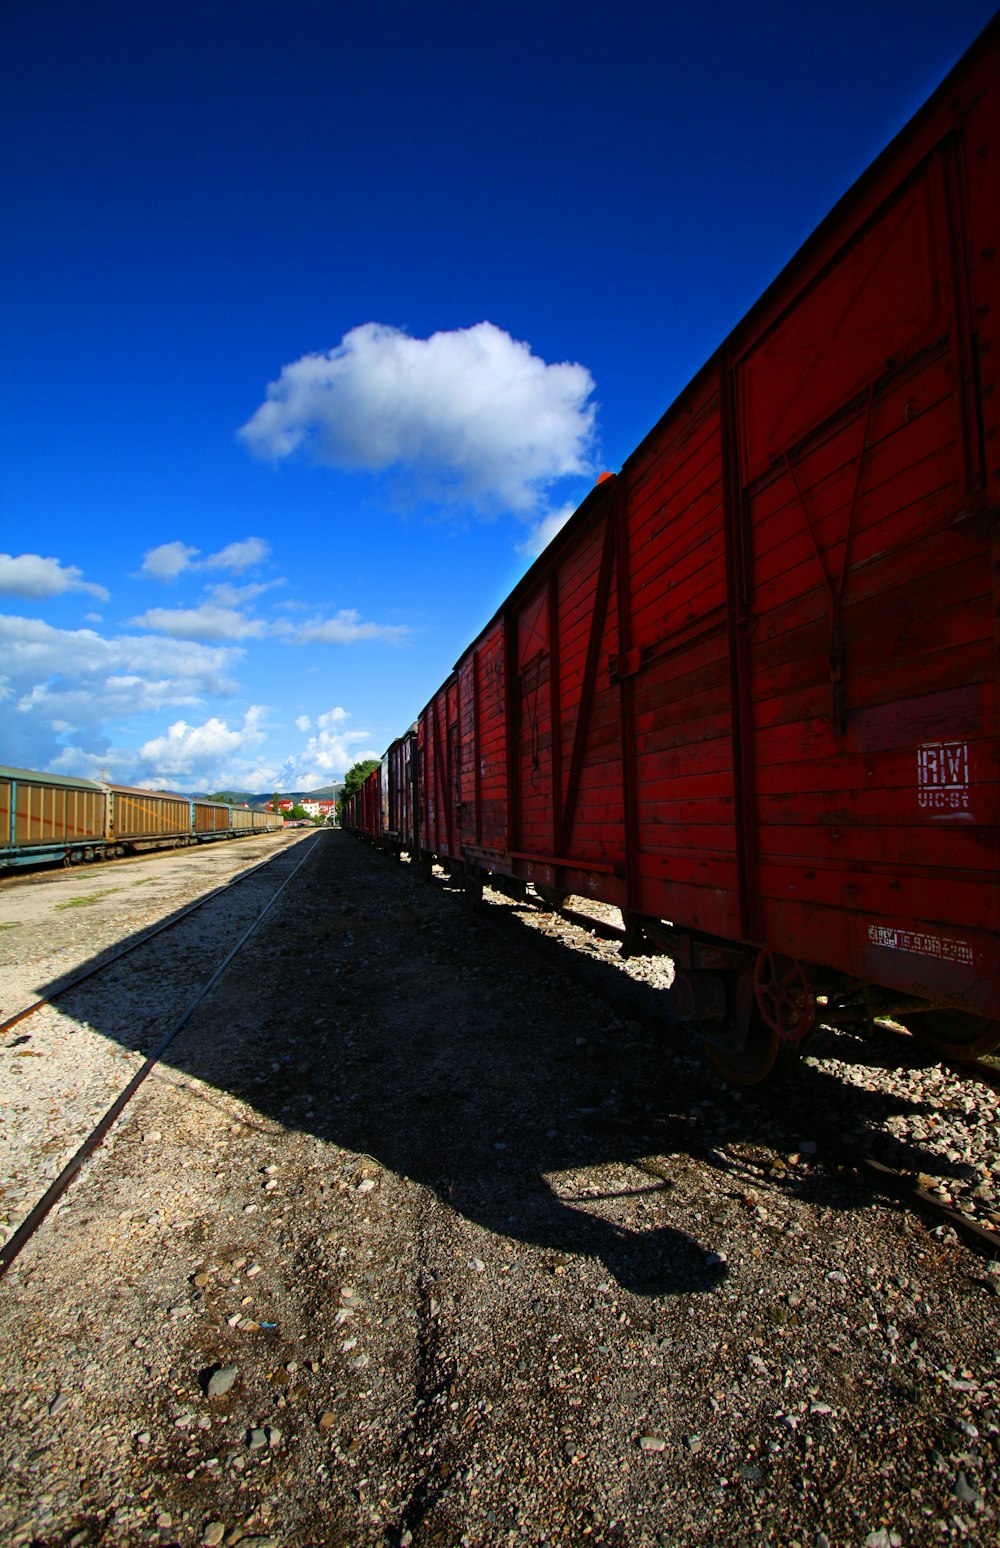 a long red train traveling down train tracks